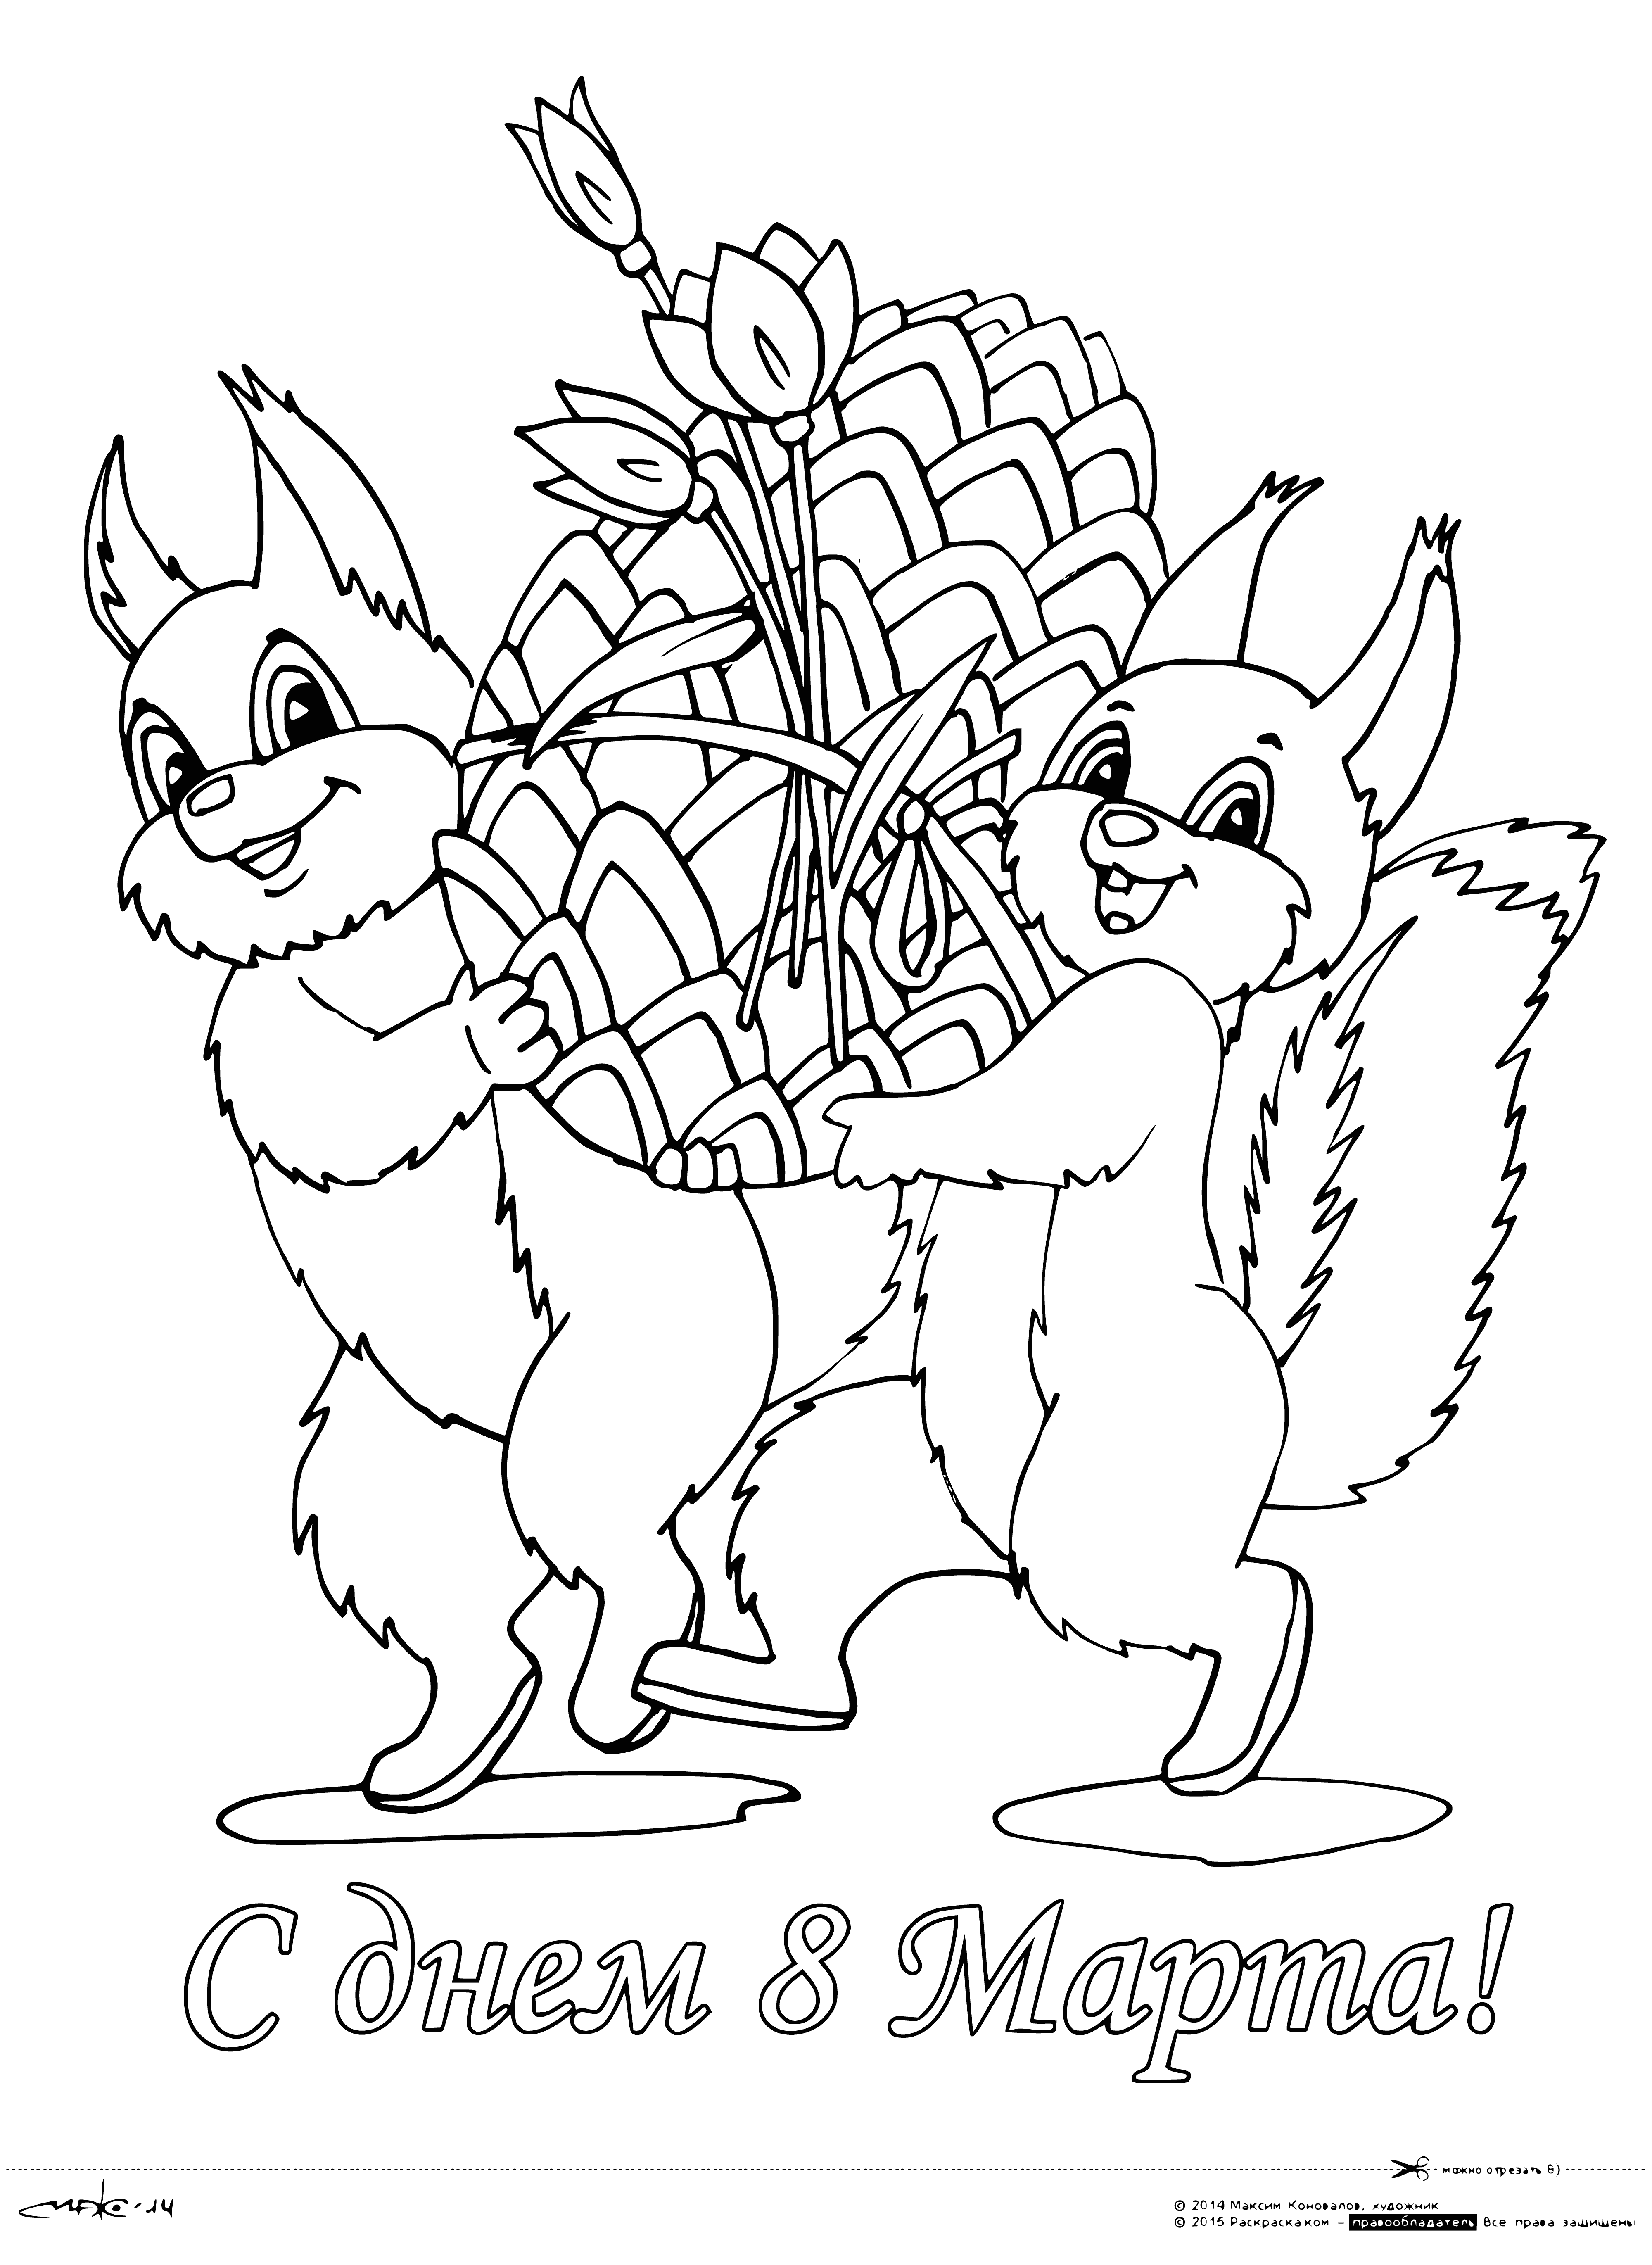 Happy 8 March greeting card coloring page